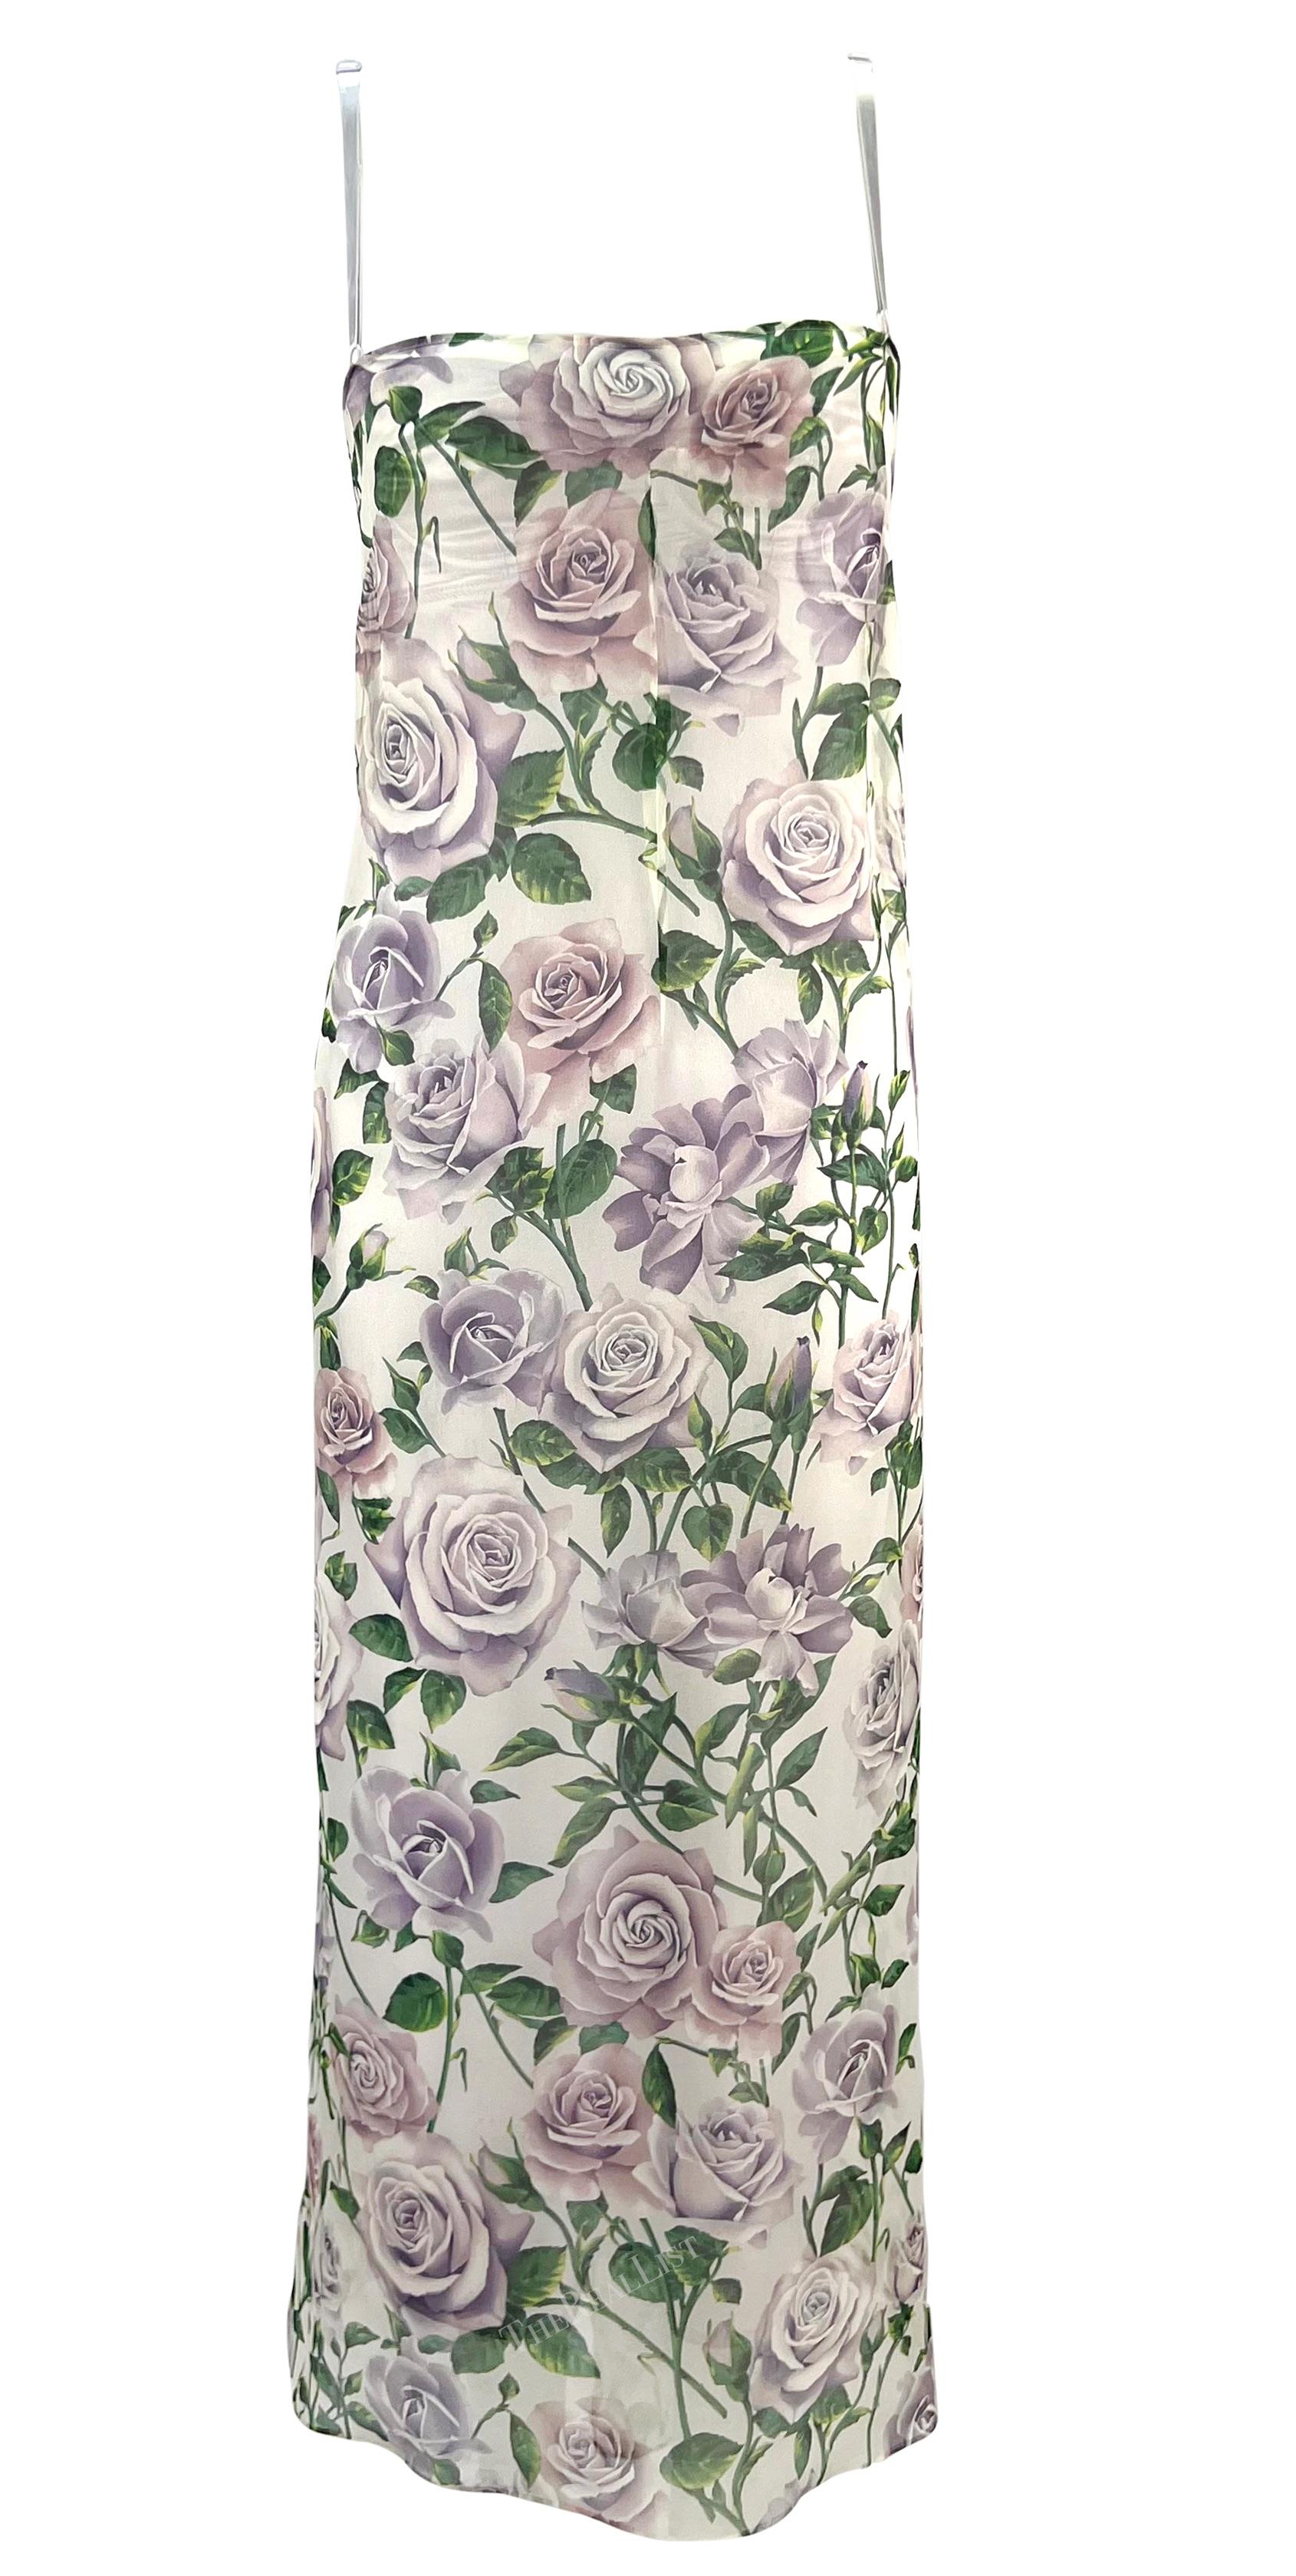 Early 2000s Dolce & Gabbana Sheer Chiffon White Purple Rose Print Overlay Gown For Sale 3